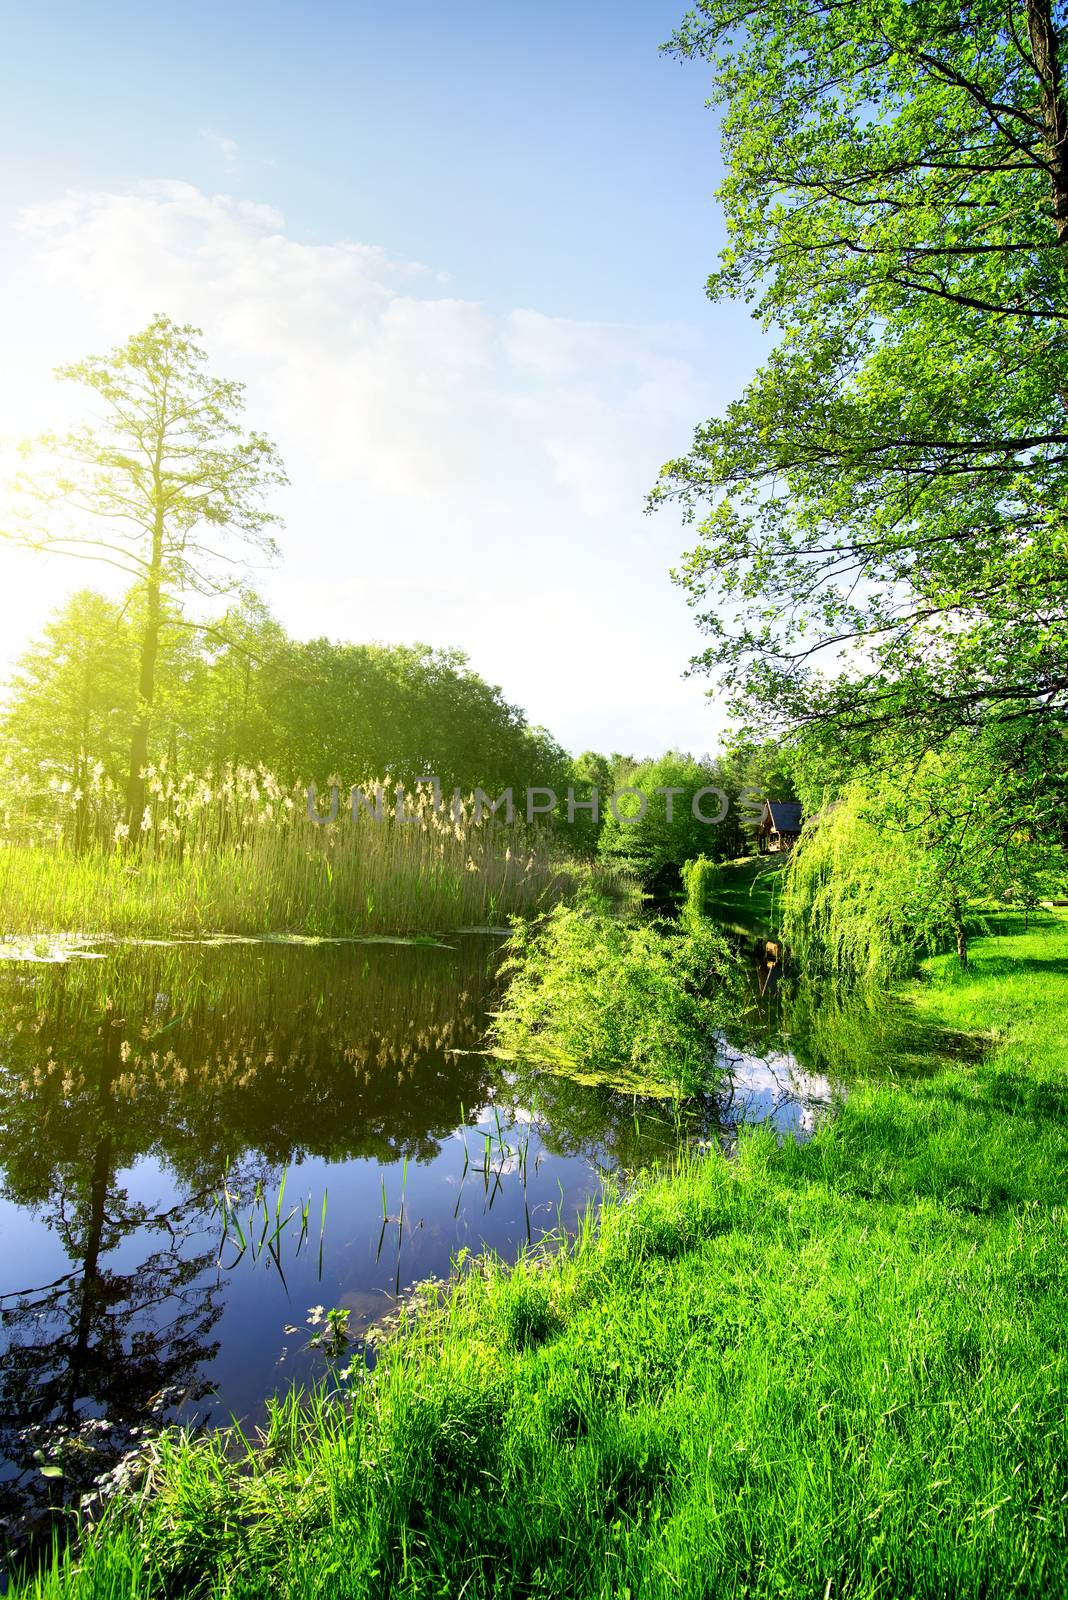 Calm river and green forest at sunrise